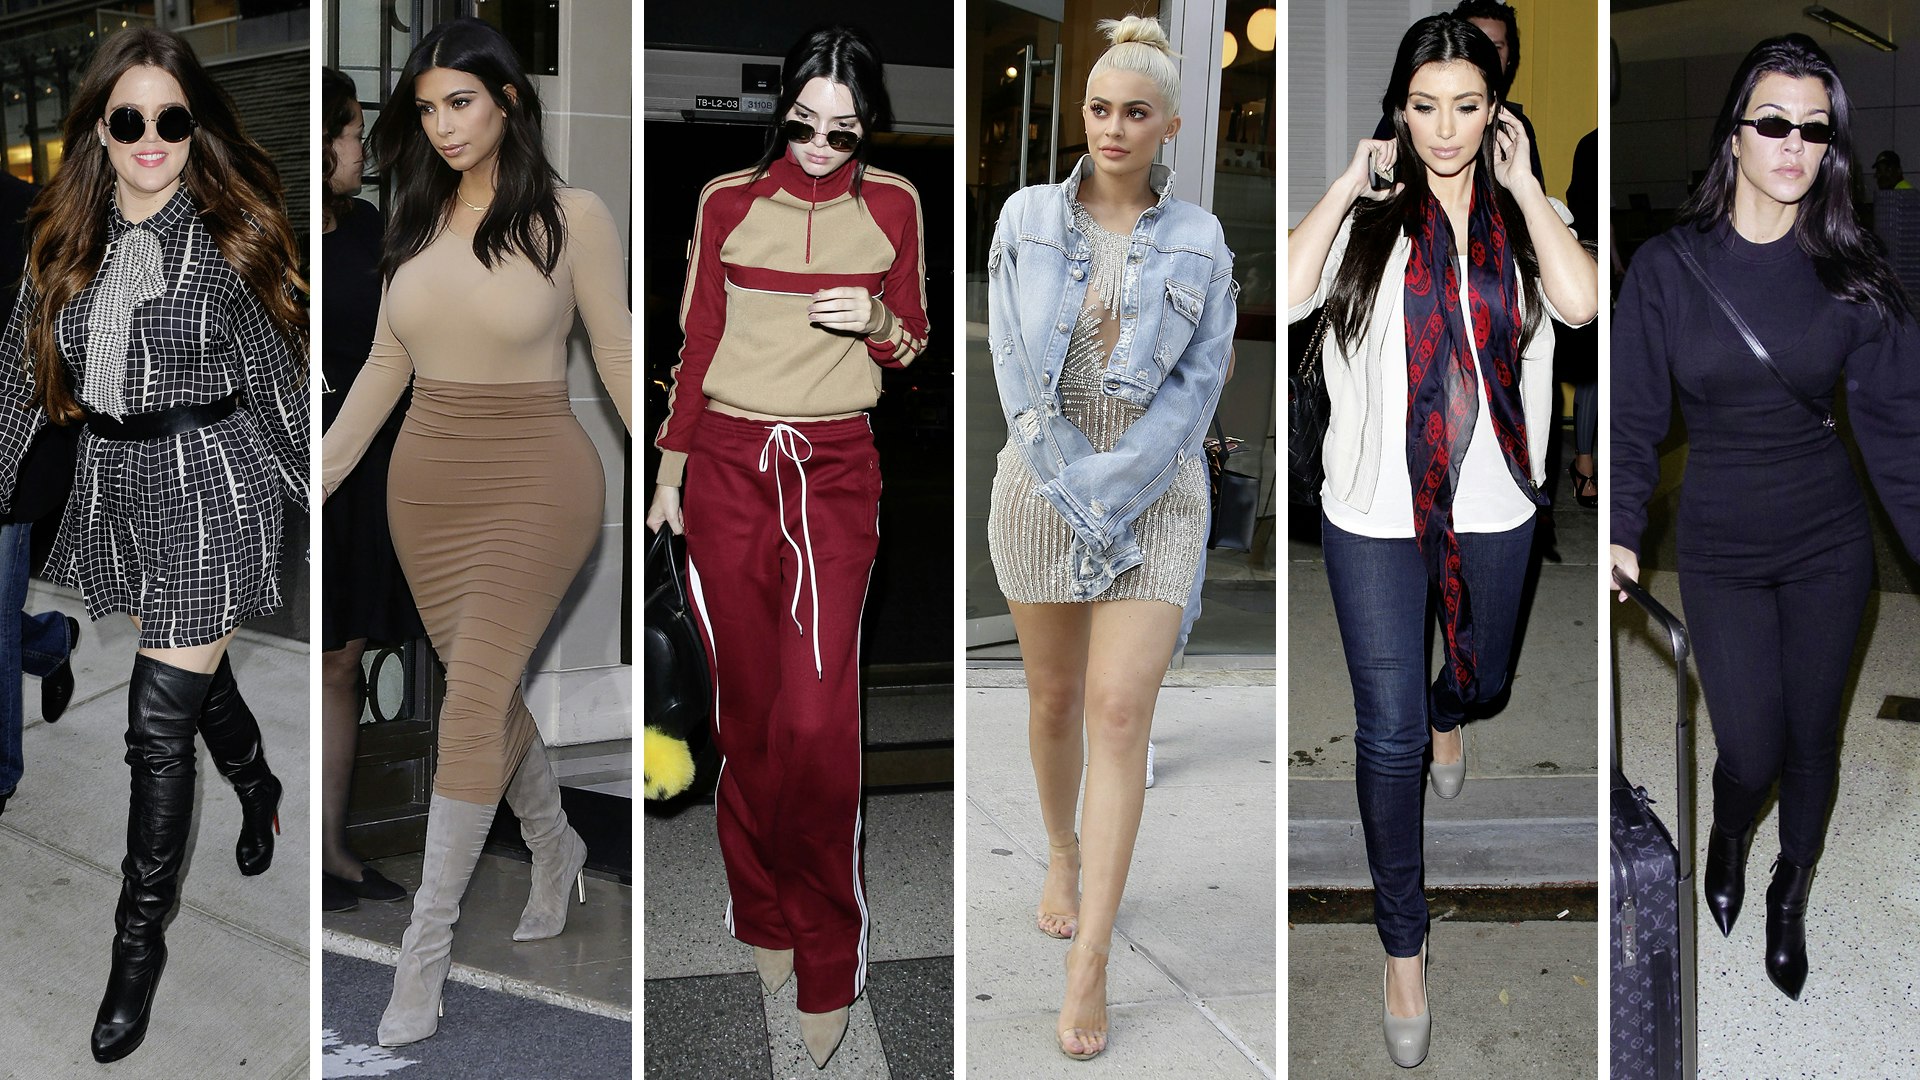 Beauty and fashion trends that has been started by the Kardashians